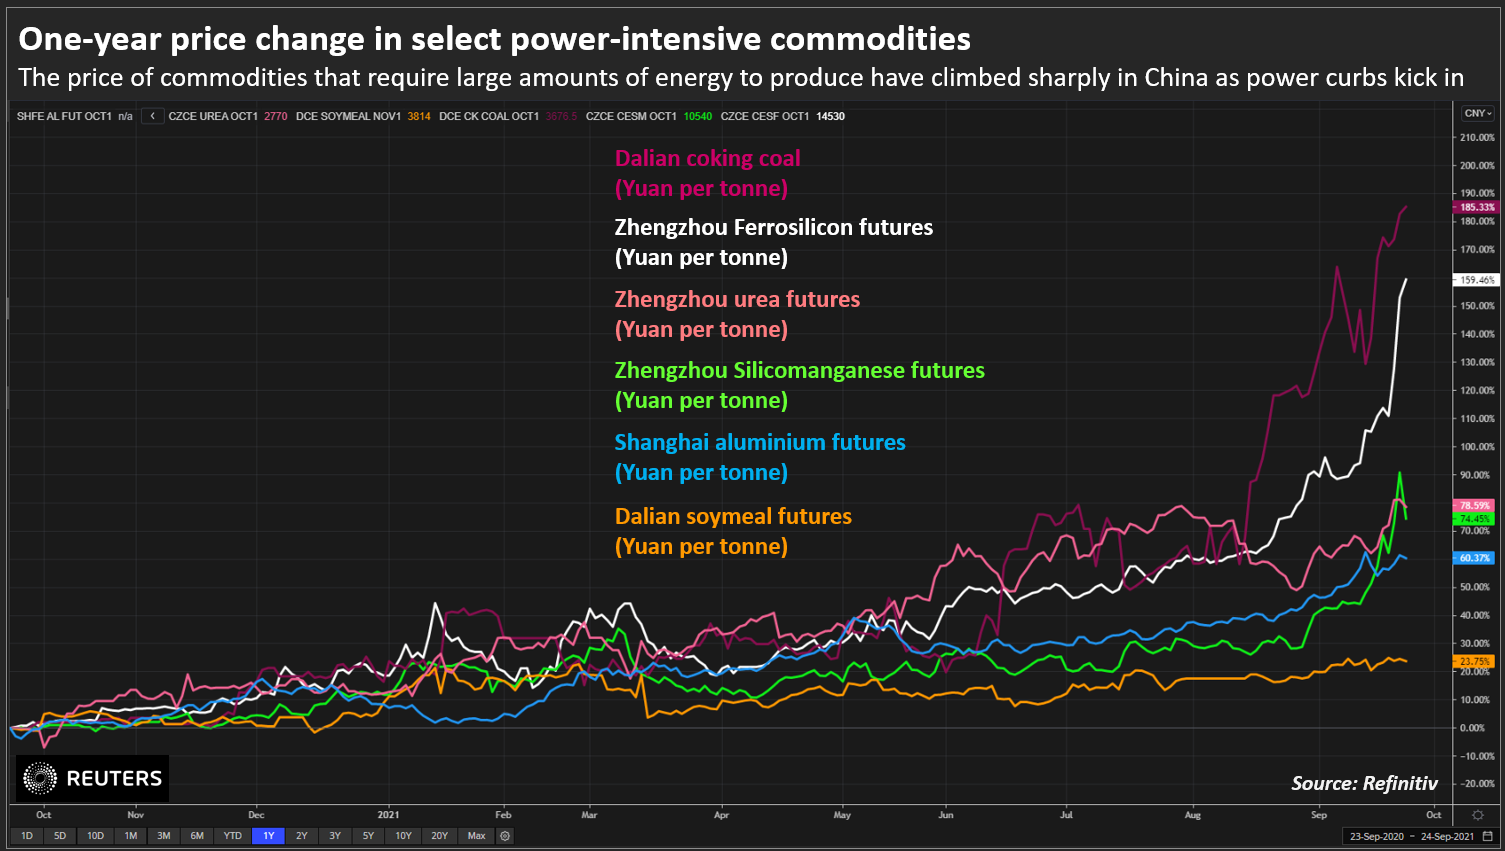 One-year price change in select power-intensive commodities